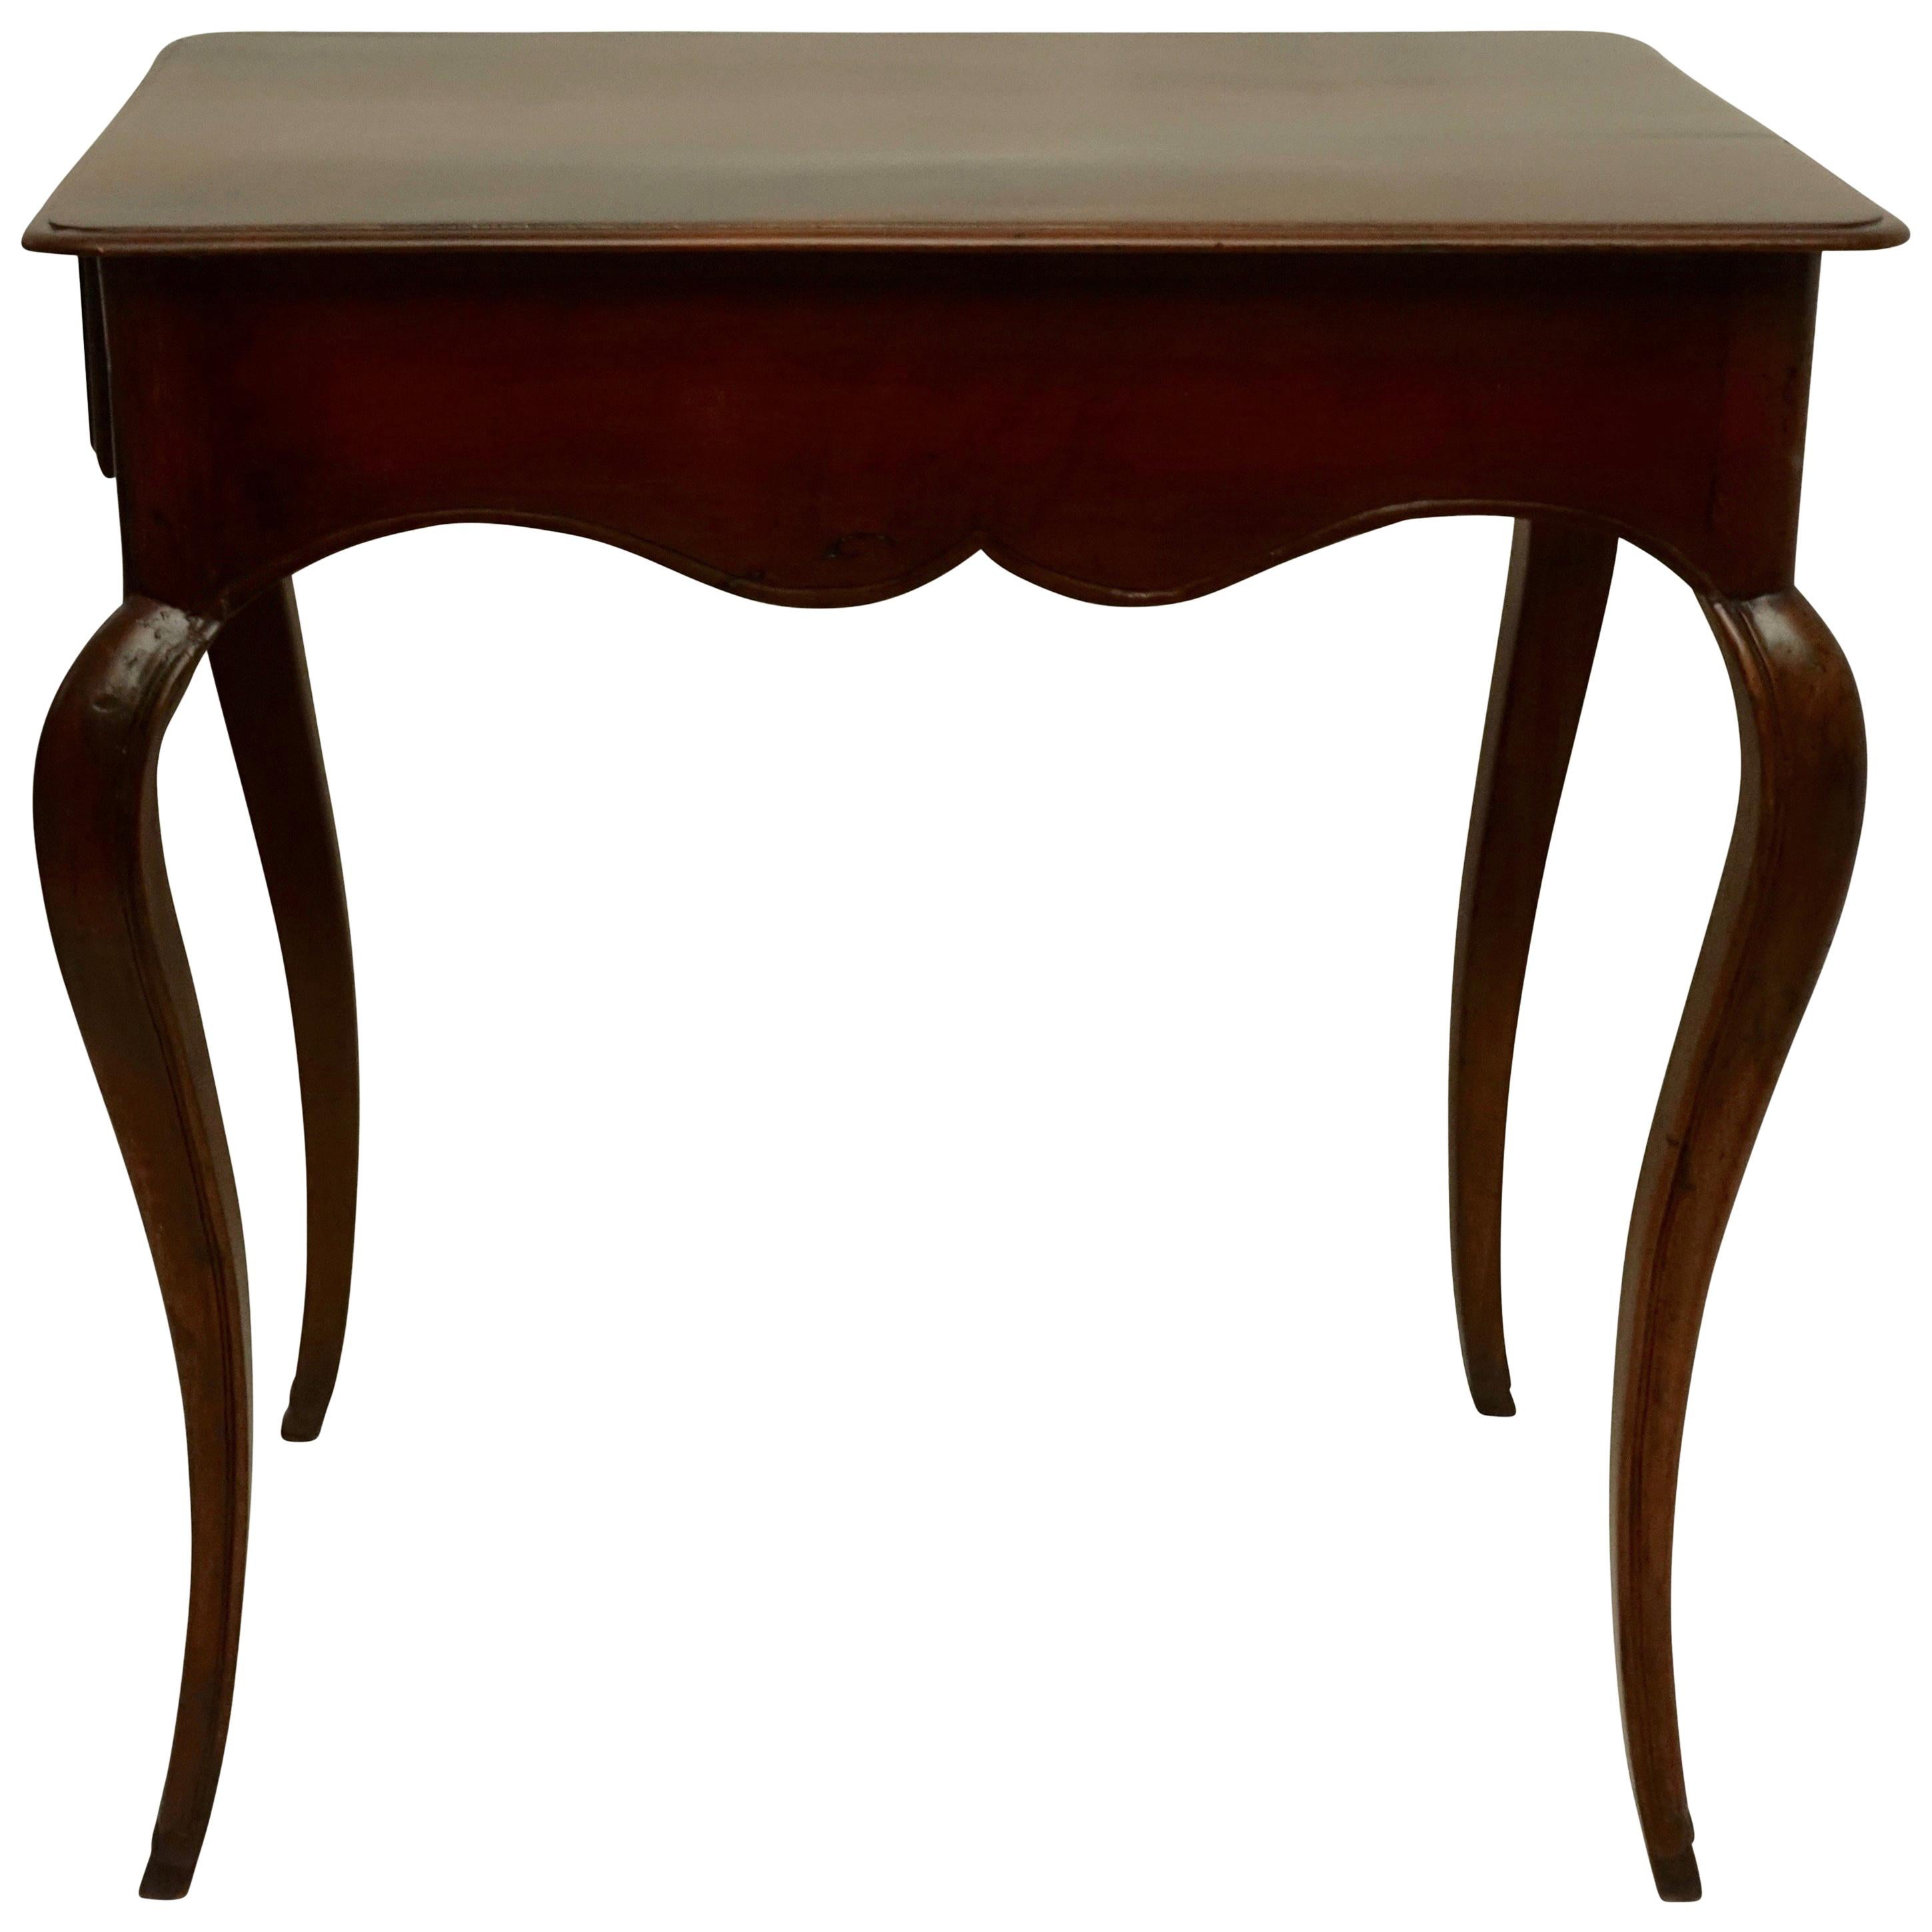 Louis XVI Mahogany Work Table with Single Drawer, French, circa 1790